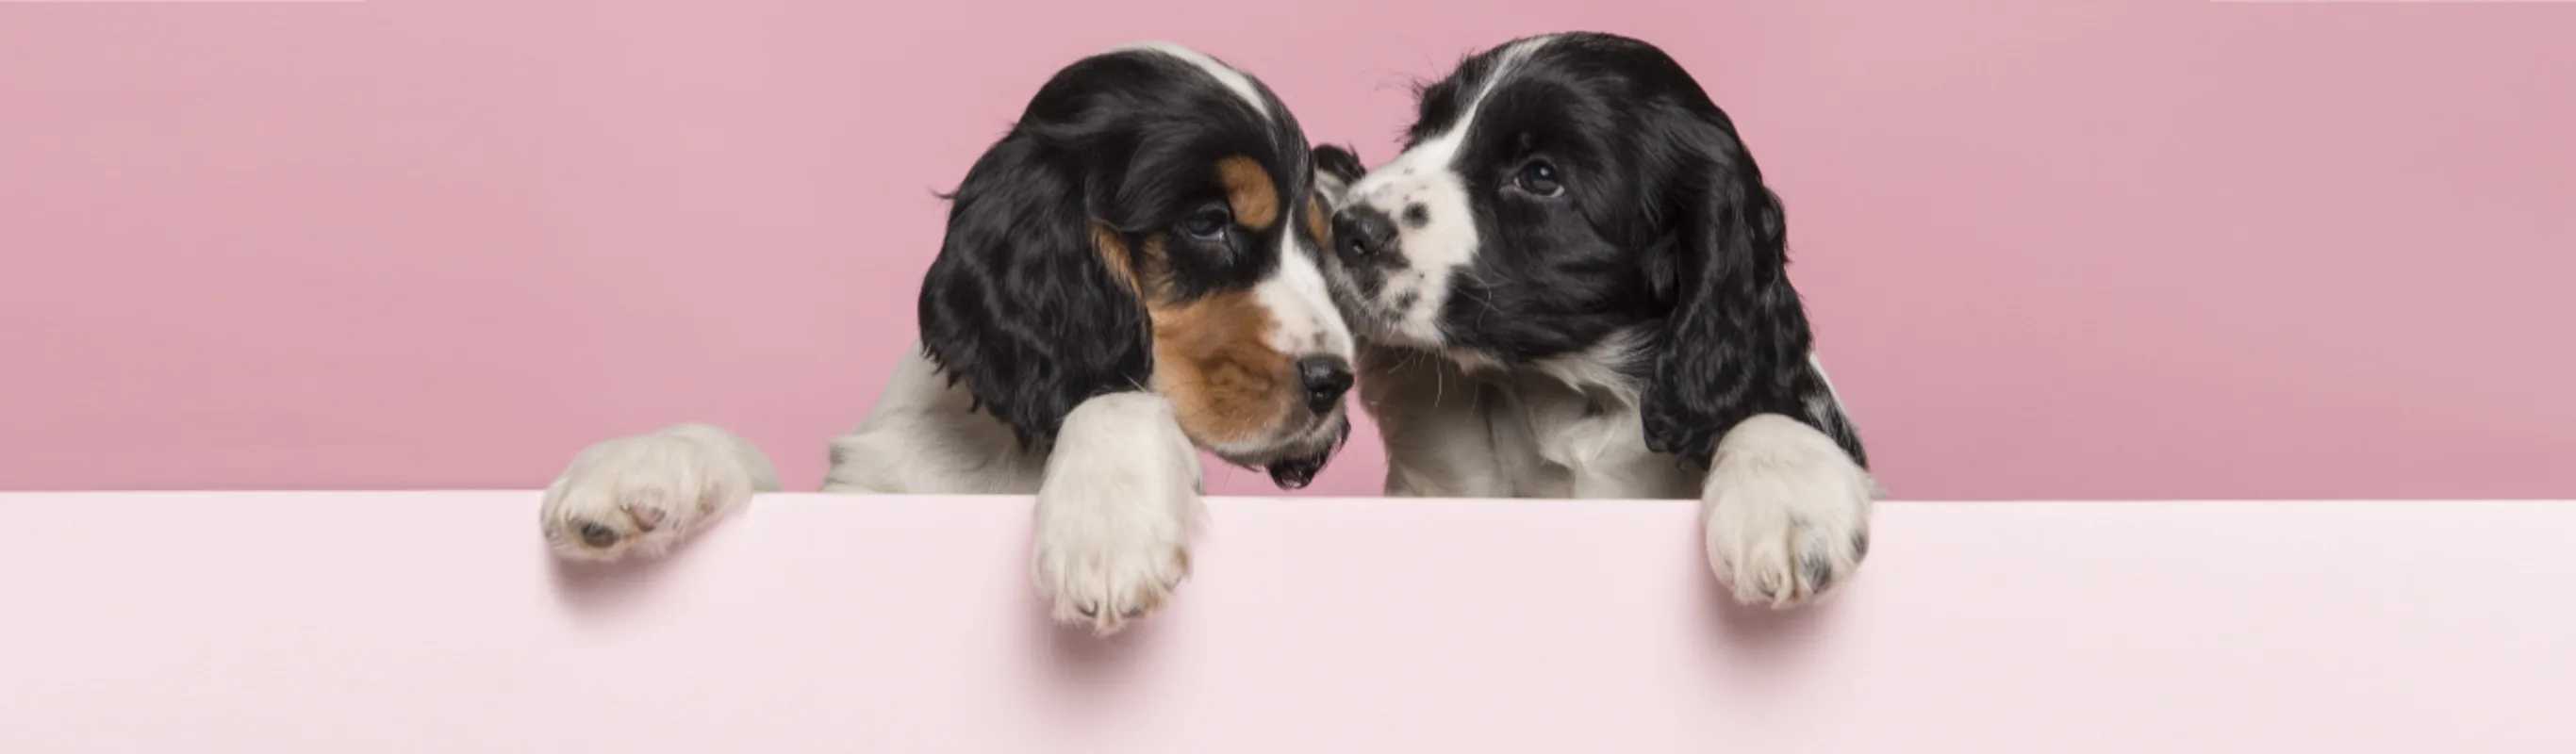 Two Dogs Peering Over a Pink Wall